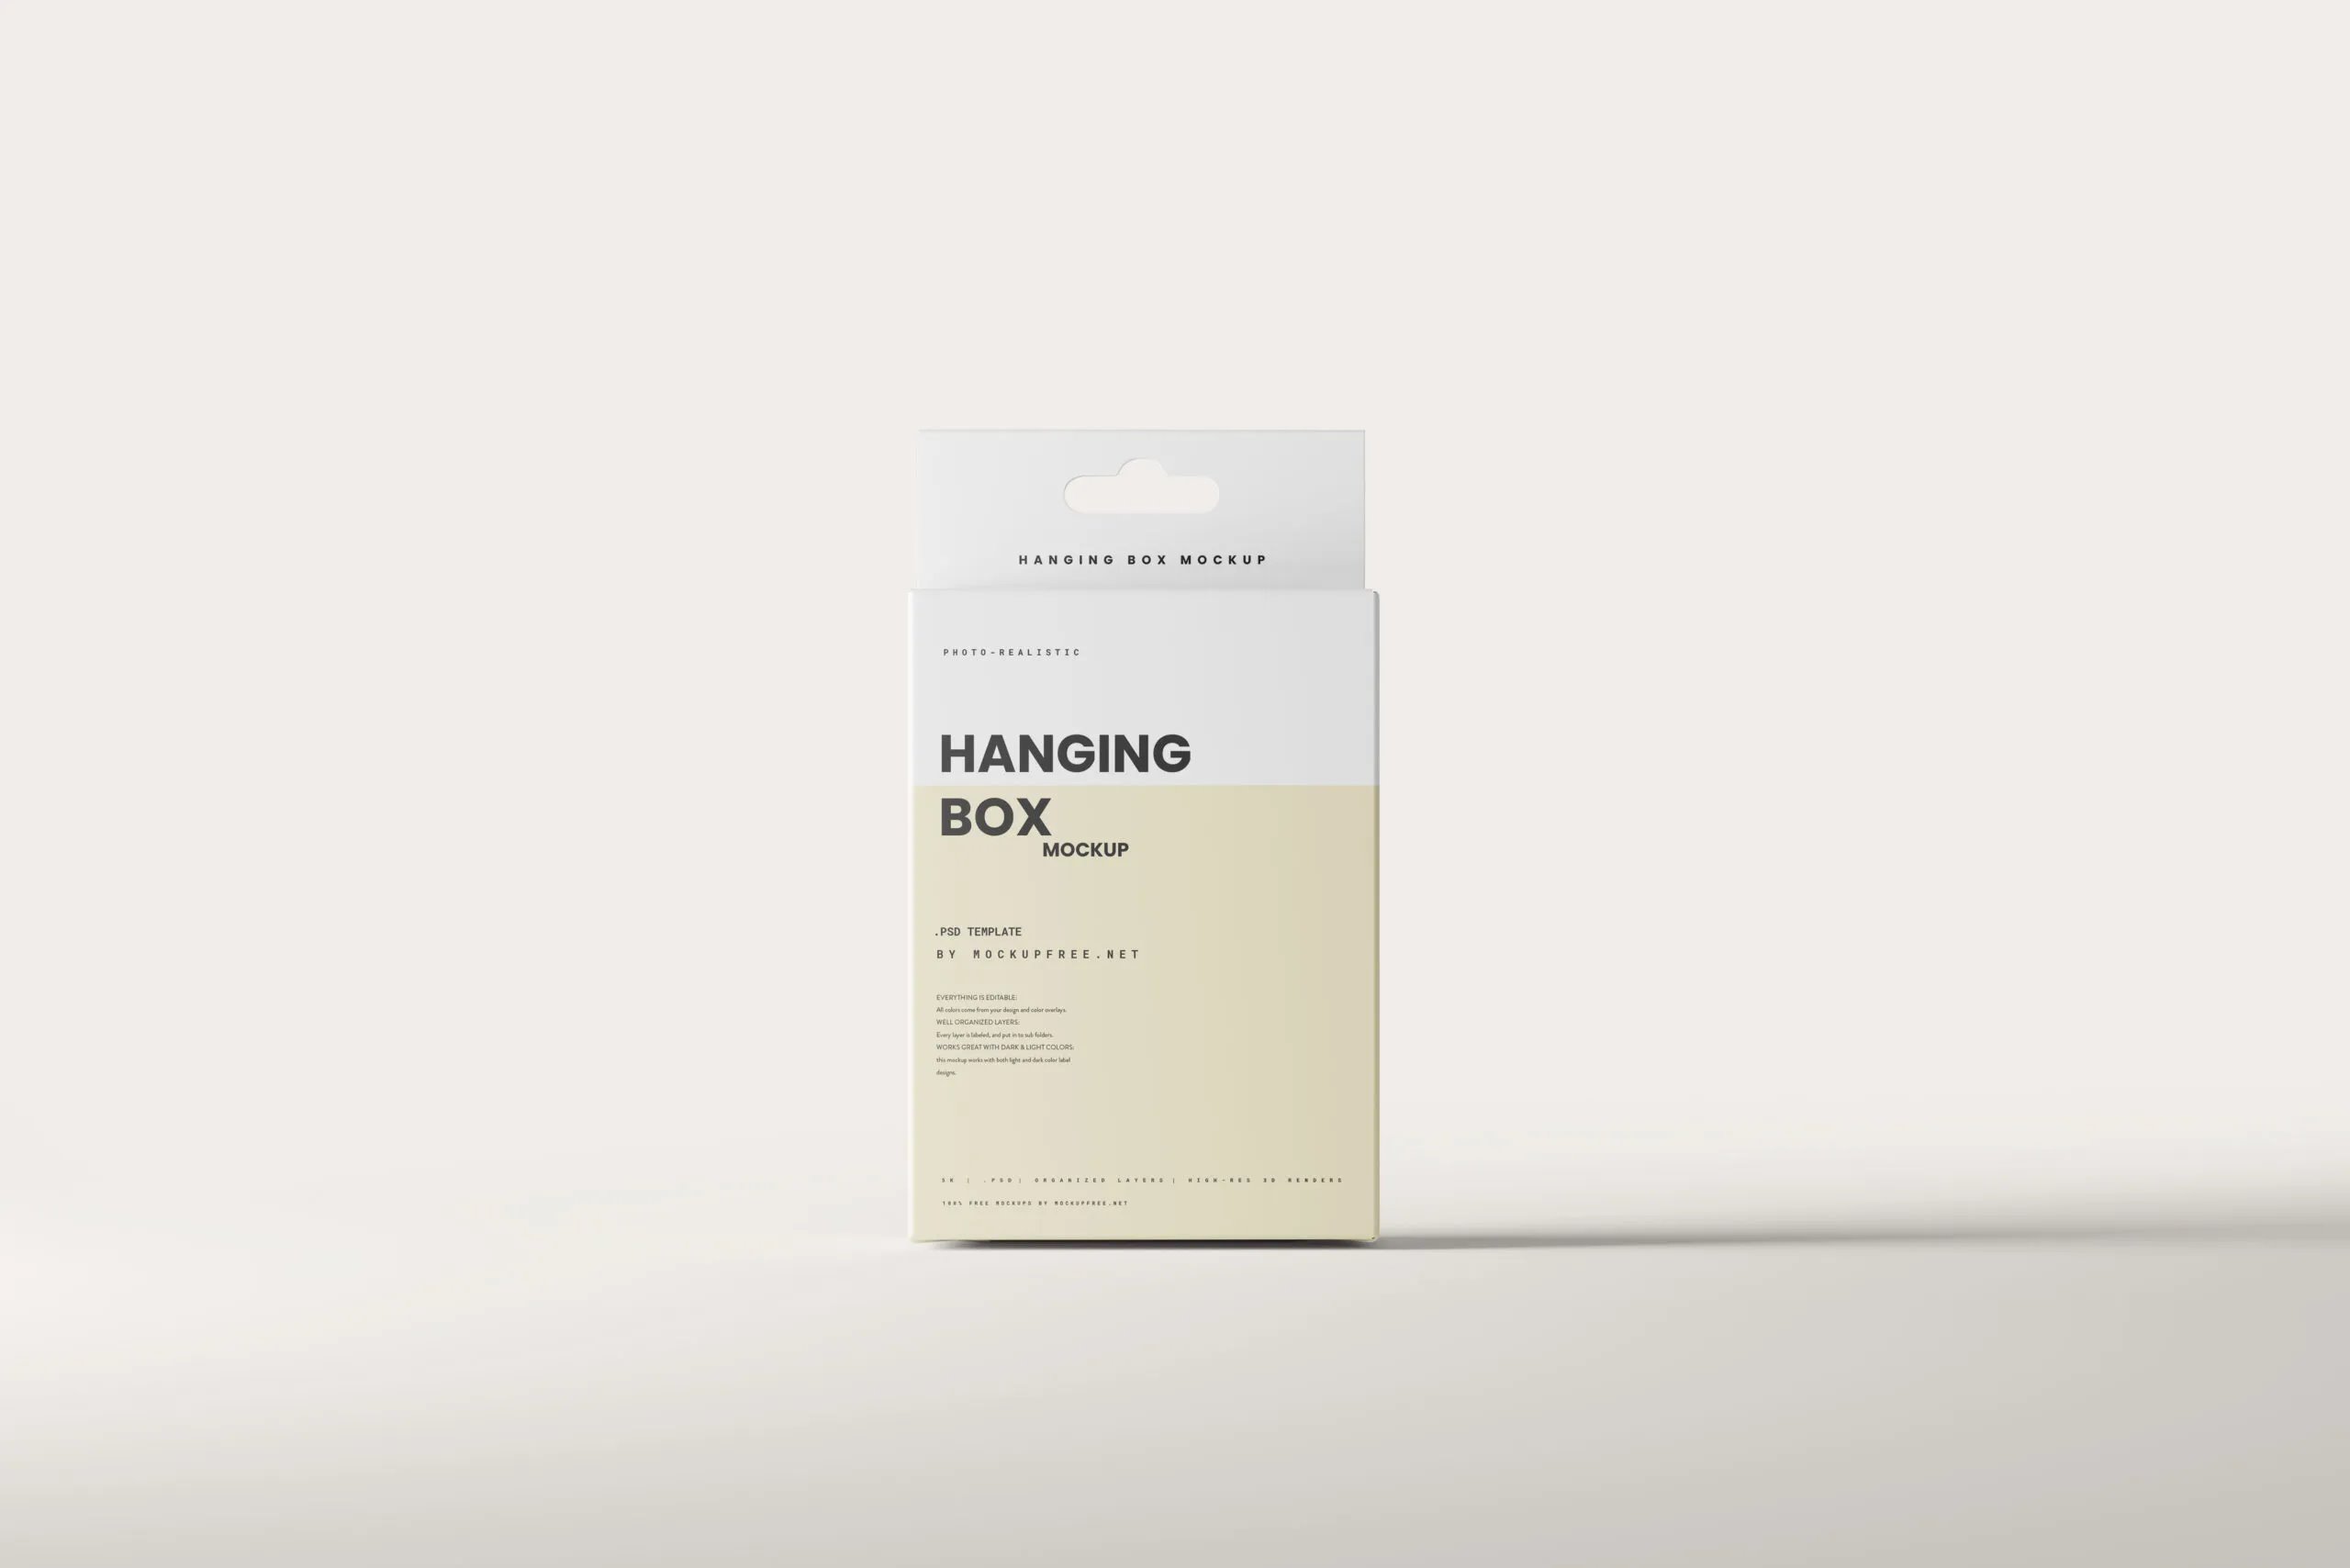 10 Mockups of Hanging Boxes in Varied Visions FREE PSD